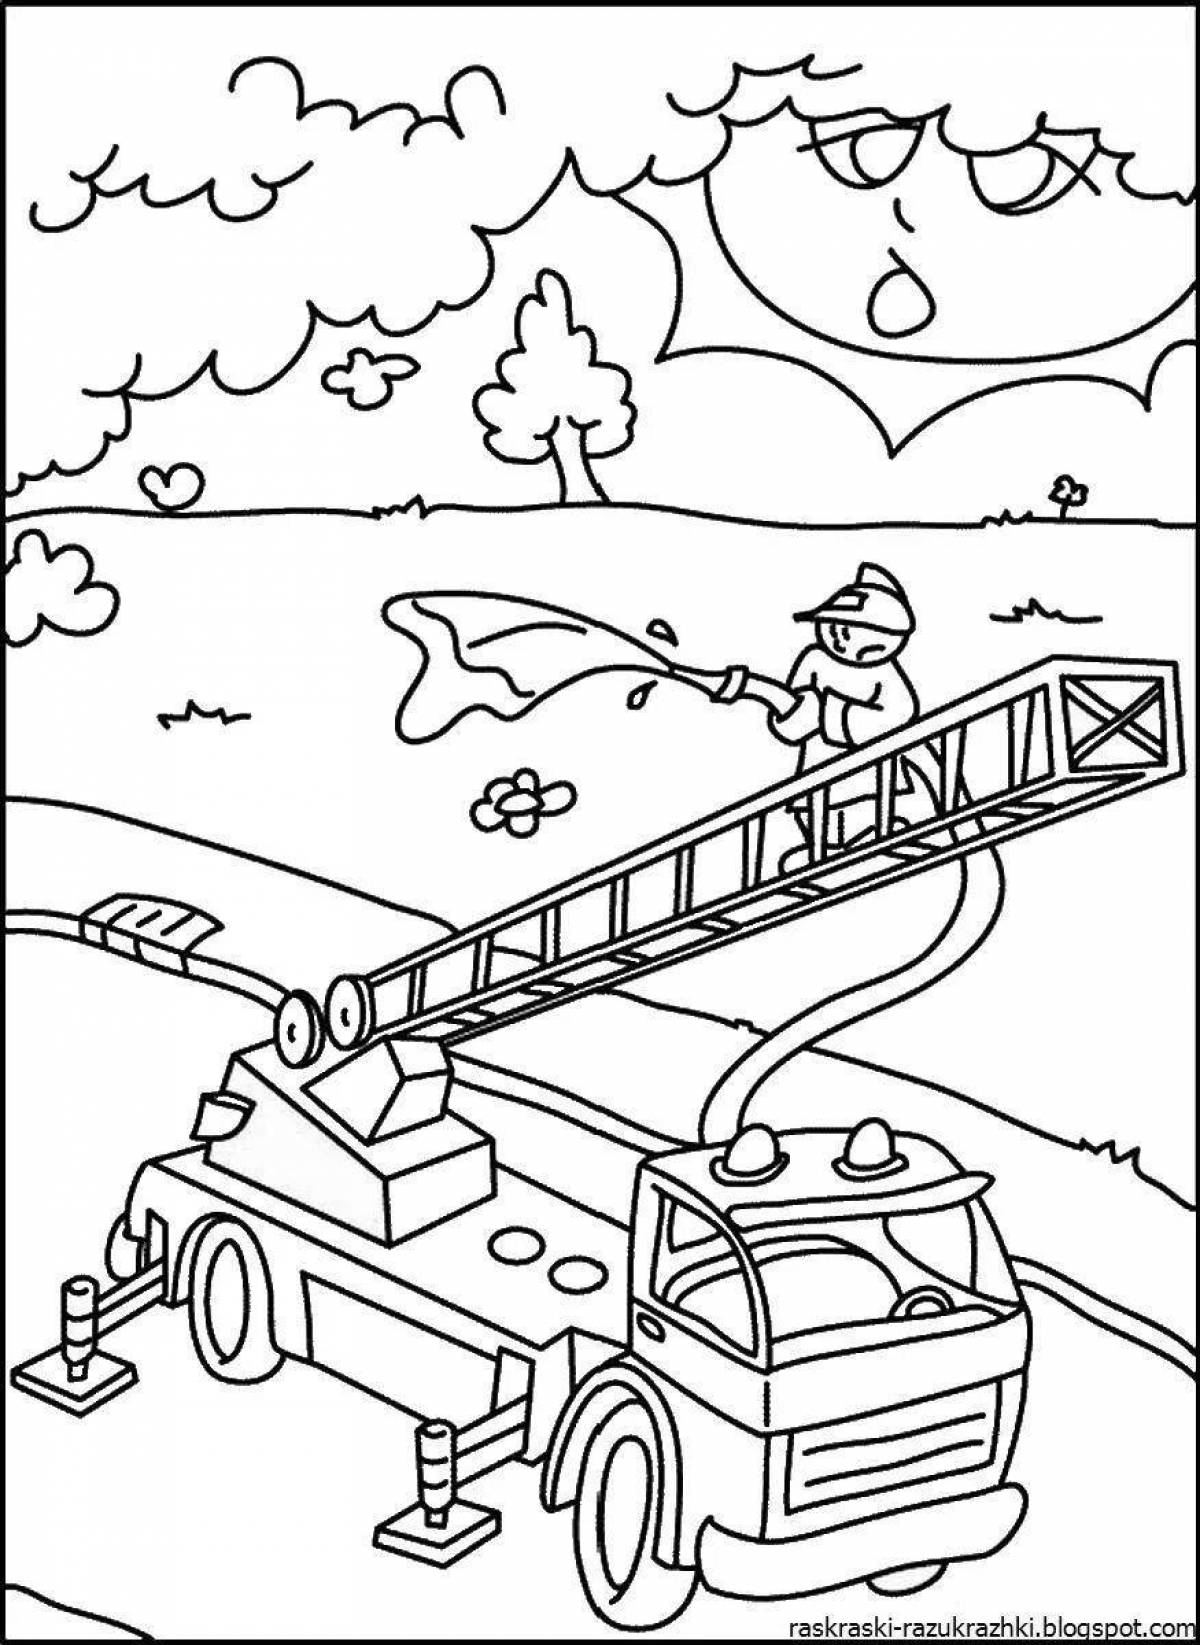 Lovely drawing of a fireman for kids